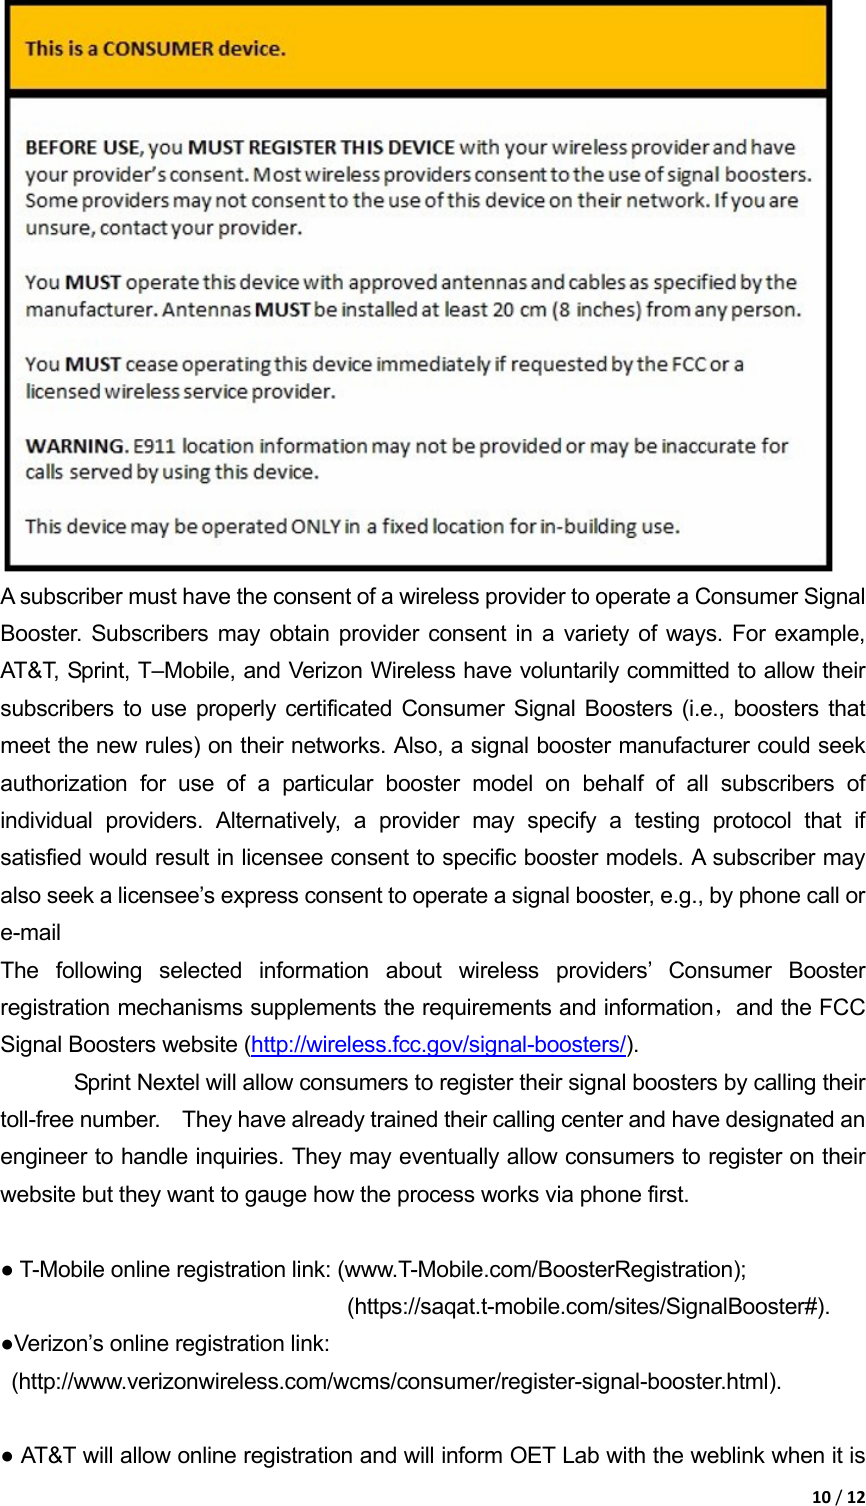 10/12 A subscriber must have the consent of a wireless provider to operate a Consumer Signal Booster. Subscribers may obtain provider consent in a variety of ways. For example, AT&amp;T, Sprint, T–Mobile, and Verizon Wireless have voluntarily committed to allow their subscribers to use properly certificated Consumer Signal Boosters (i.e., boosters that meet the new rules) on their networks. Also, a signal booster manufacturer could seek authorization for use of a particular booster model on behalf of all subscribers of individual providers. Alternatively, a provider may specify a testing protocol that if satisfied would result in licensee consent to specific booster models. A subscriber may also seek a licensee’s express consent to operate a signal booster, e.g., by phone call or e-mail The following selected information about wireless providers’ Consumer Booster registration mechanisms supplements the requirements and information，and the FCC Signal Boosters website (http://wireless.fcc.gov/signal-boosters/).  Sprint Nextel will allow consumers to register their signal boosters by calling their 　toll-free number.    They have already trained their calling center and have designated an engineer to handle inquiries. They may eventually allow consumers to register on their website but they want to gauge how the process works via phone first.    ● T-Mobile online registration link: (www.T-Mobile.com/BoosterRegistration);                                 (https://saqat.t-mobile.com/sites/SignalBooster#).  ●Verizon’s online registration link:  (http://www.verizonwireless.com/wcms/consumer/register-signal-booster.html).    ● AT&amp;T will allow online registration and will inform OET Lab with the weblink when it is 